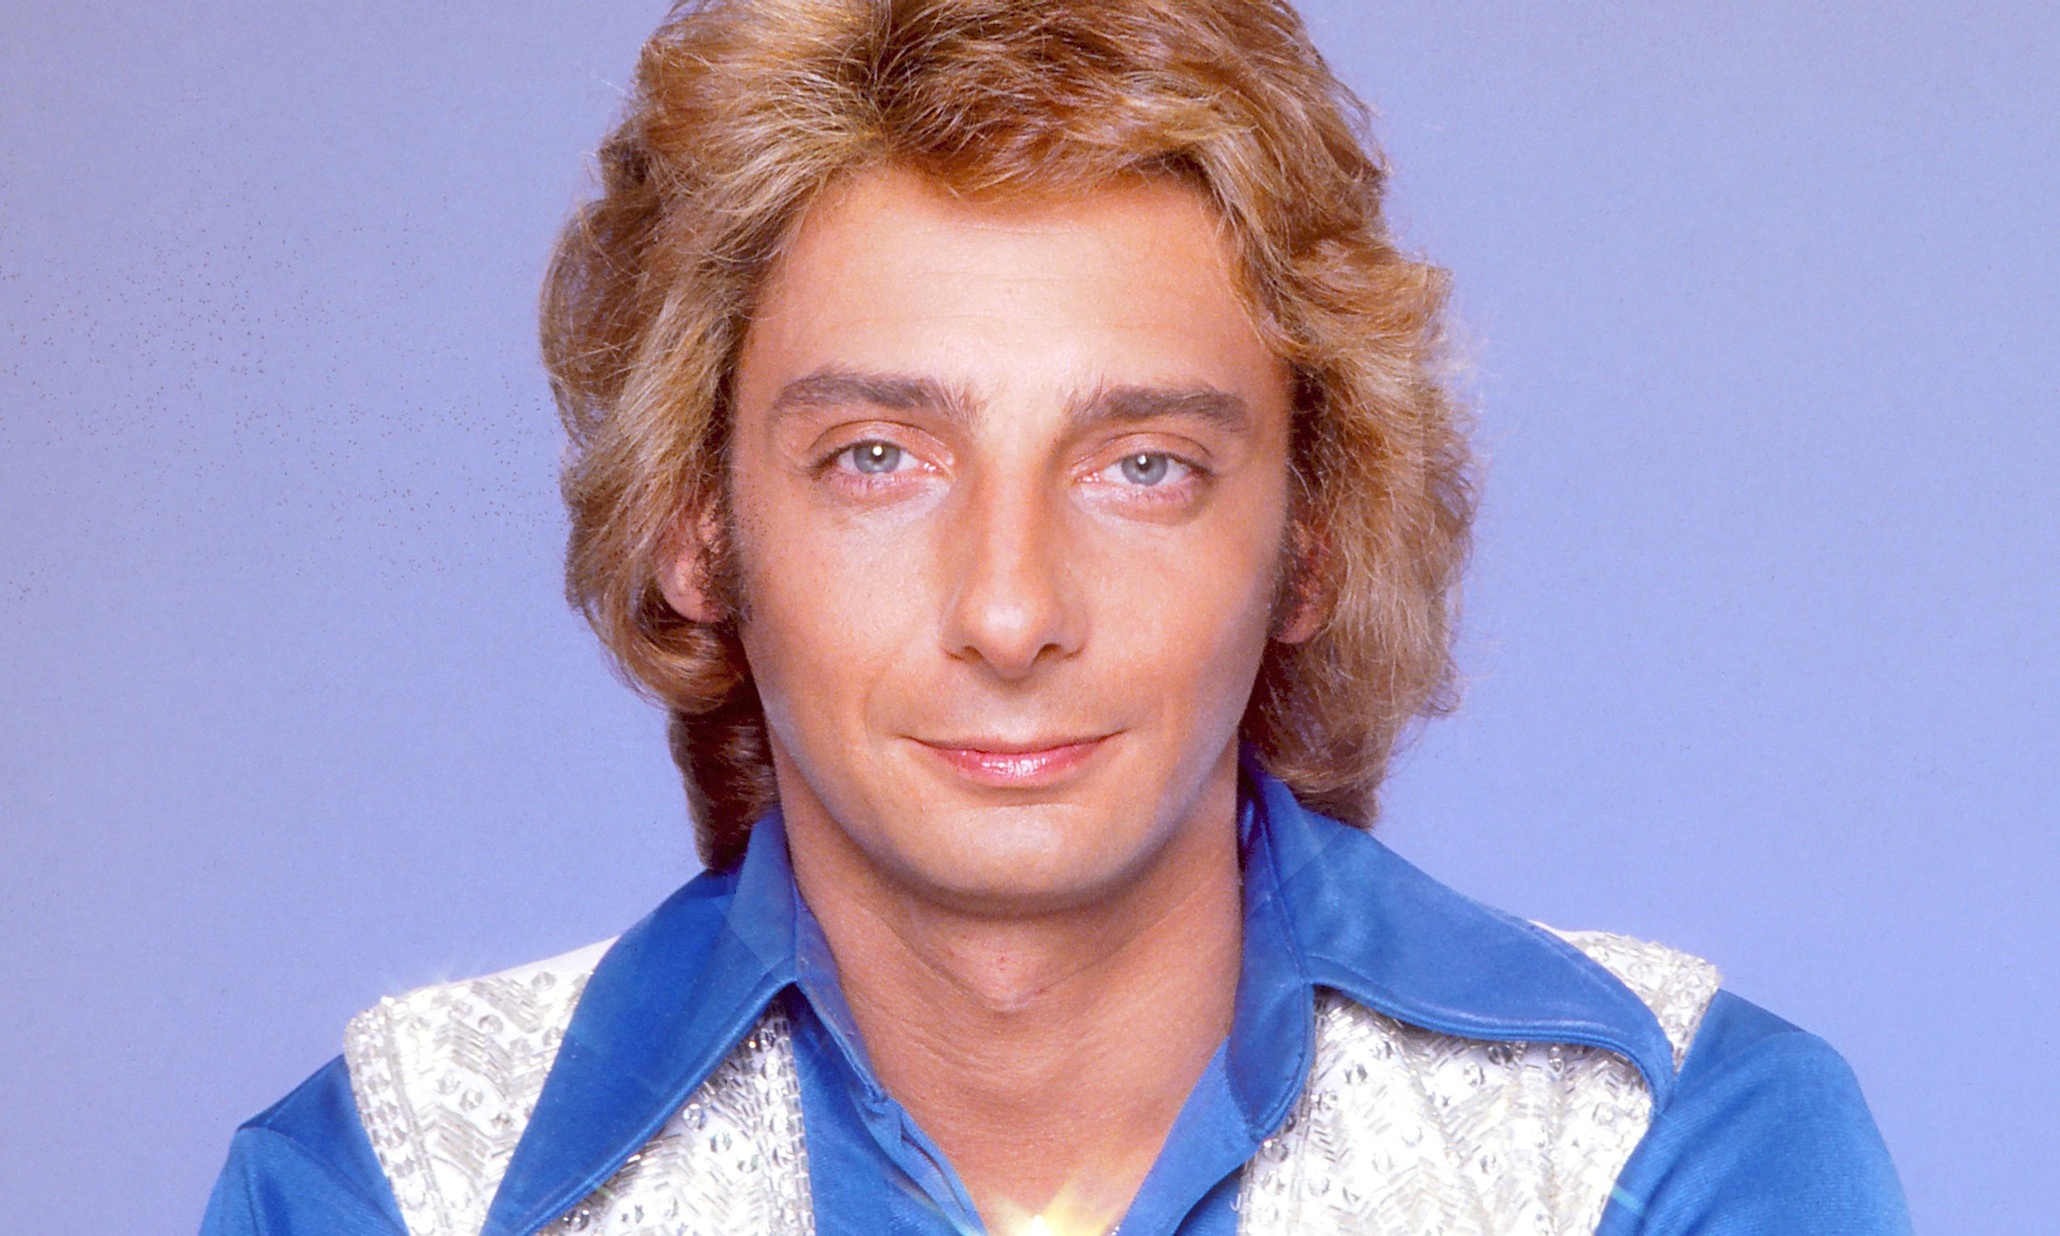 Barry Manilow, Music wallpapers, HQ pictures, 4K wallpapers, 2060x1240 HD Desktop